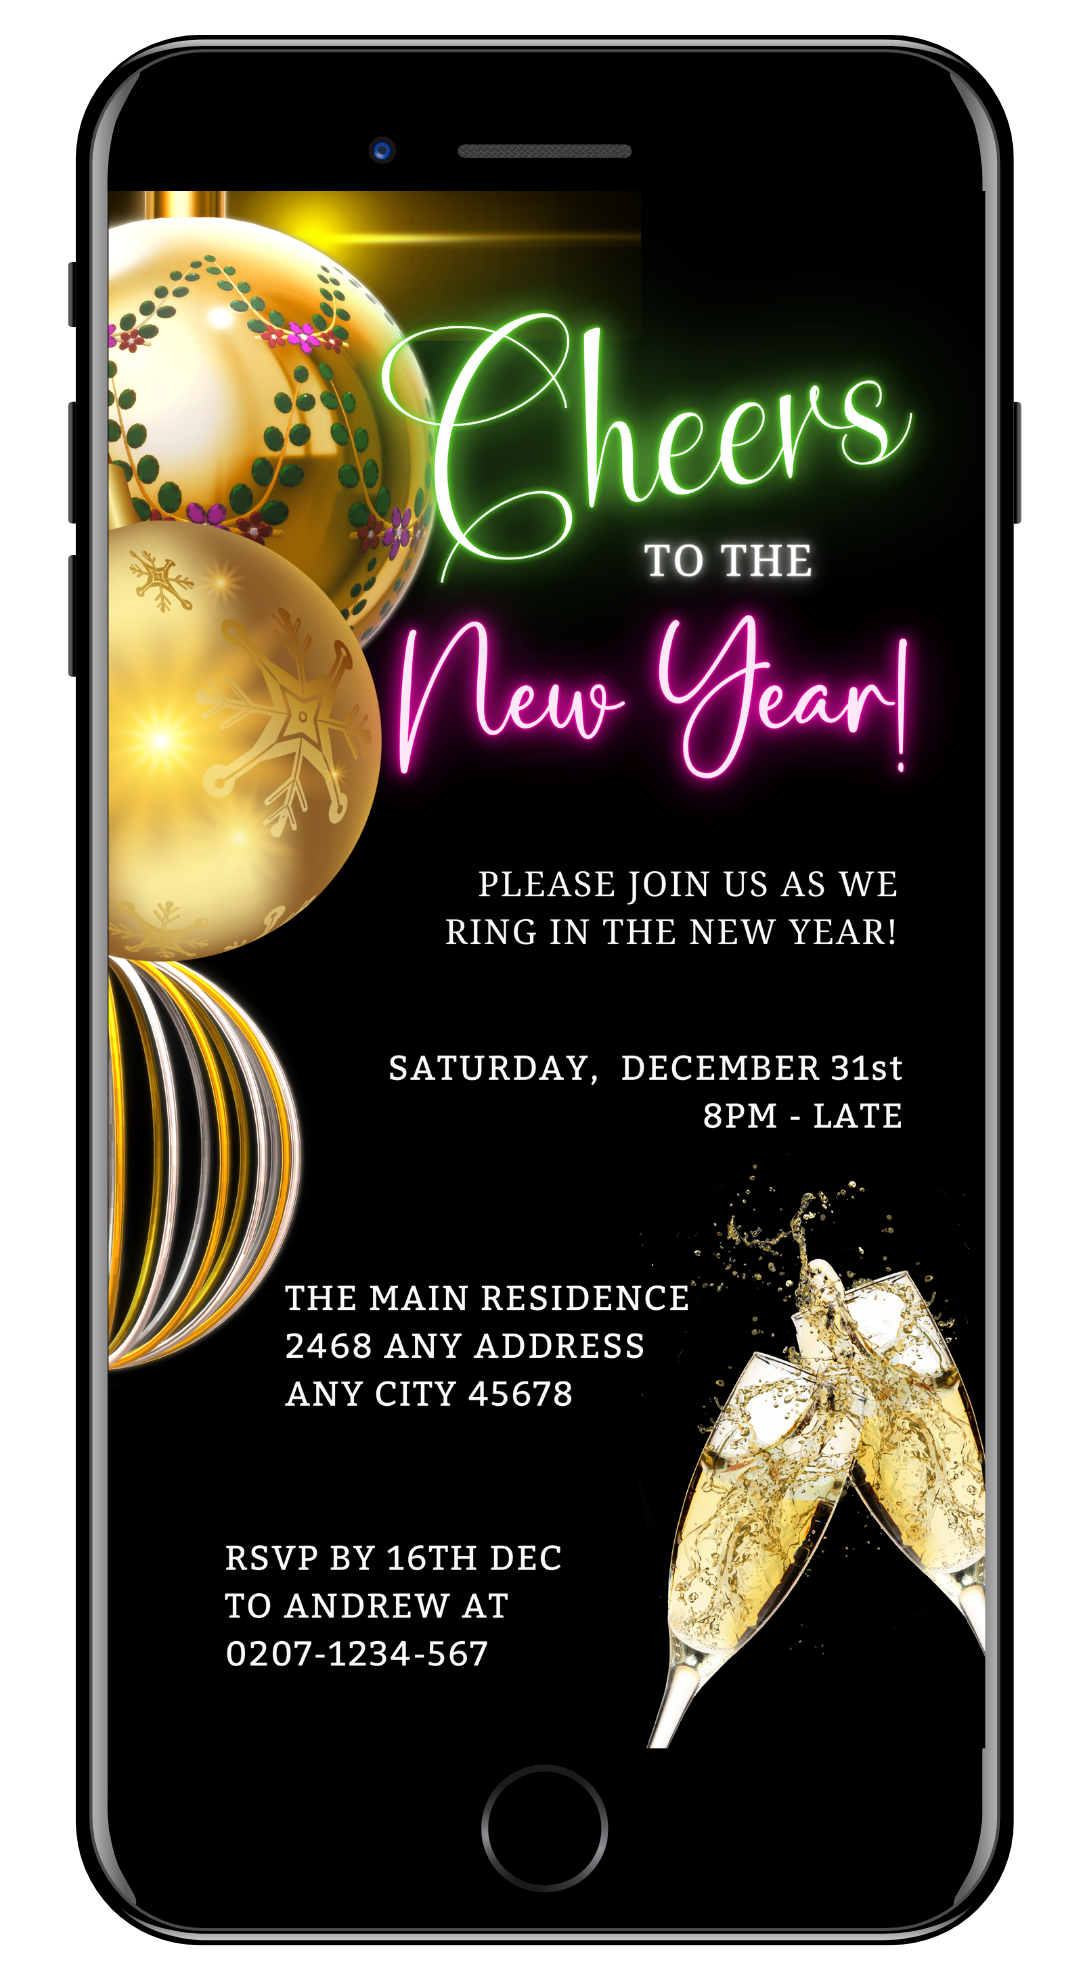 Editable digital invitation featuring Neon Pink Green Ornaments Cheers text on a black background, champagne glasses, and balloons for a New Year's Eve party.